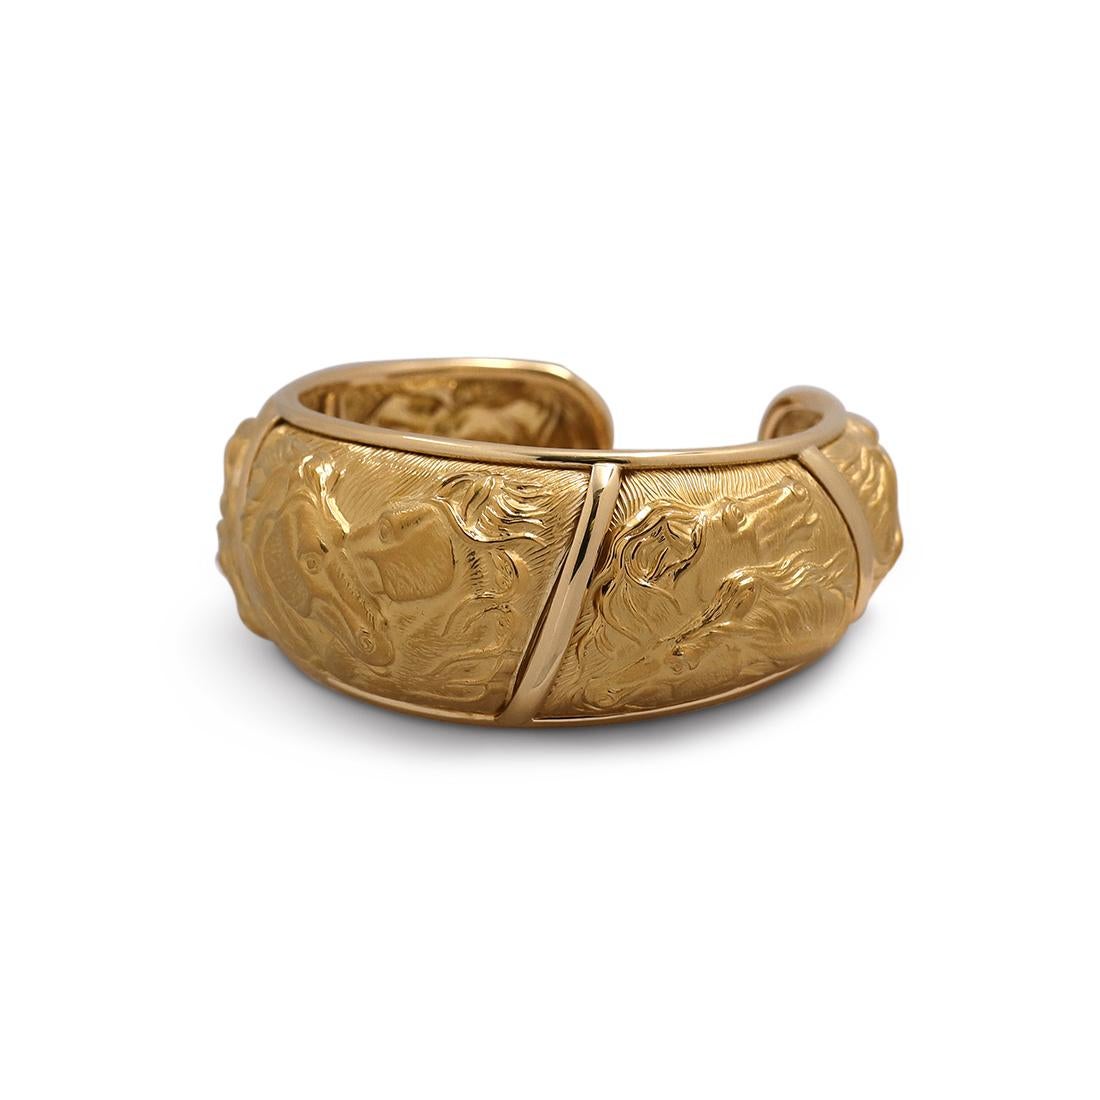 Authentic Carrera y Carrera 'Mosaico' cuff crafted in 18 karat yellow gold. The cuff is crafted using the repoussé technique featuring two horses in five separate scenes. The cuff measures 27mm in width at its widest and 20mm at its narrowest. The